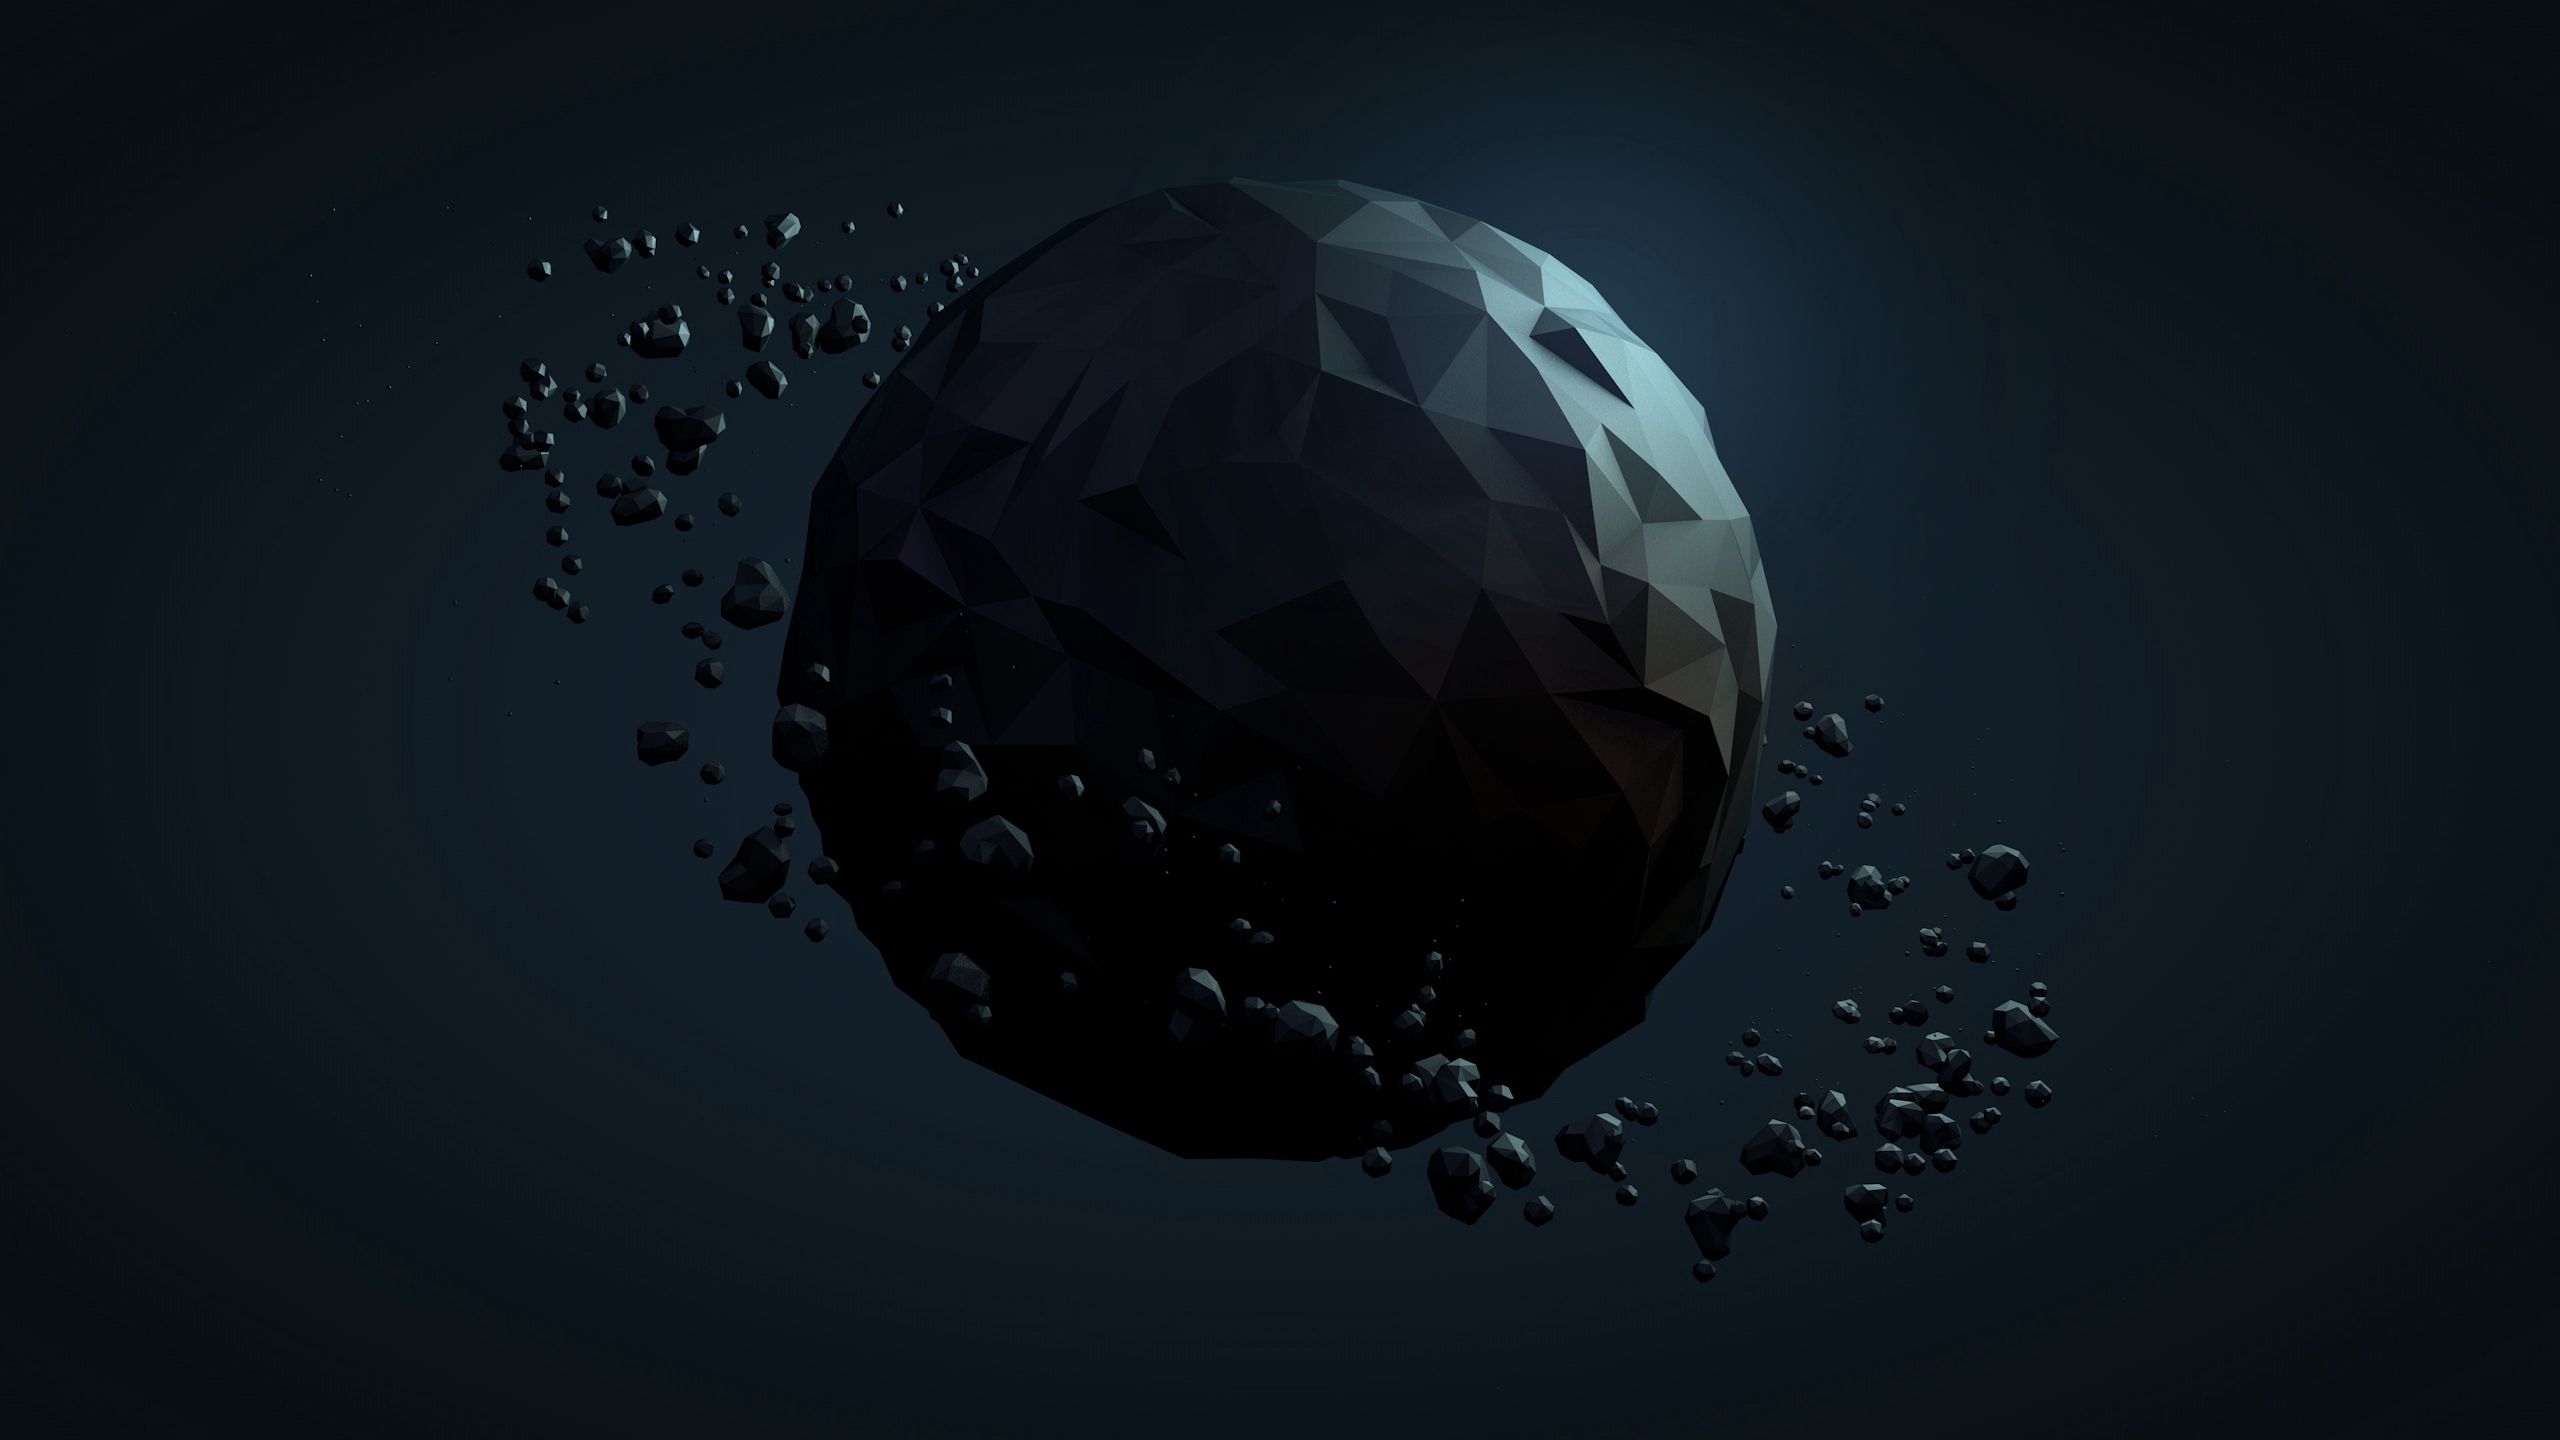 planet, dark, abstract, background, ball Full HD